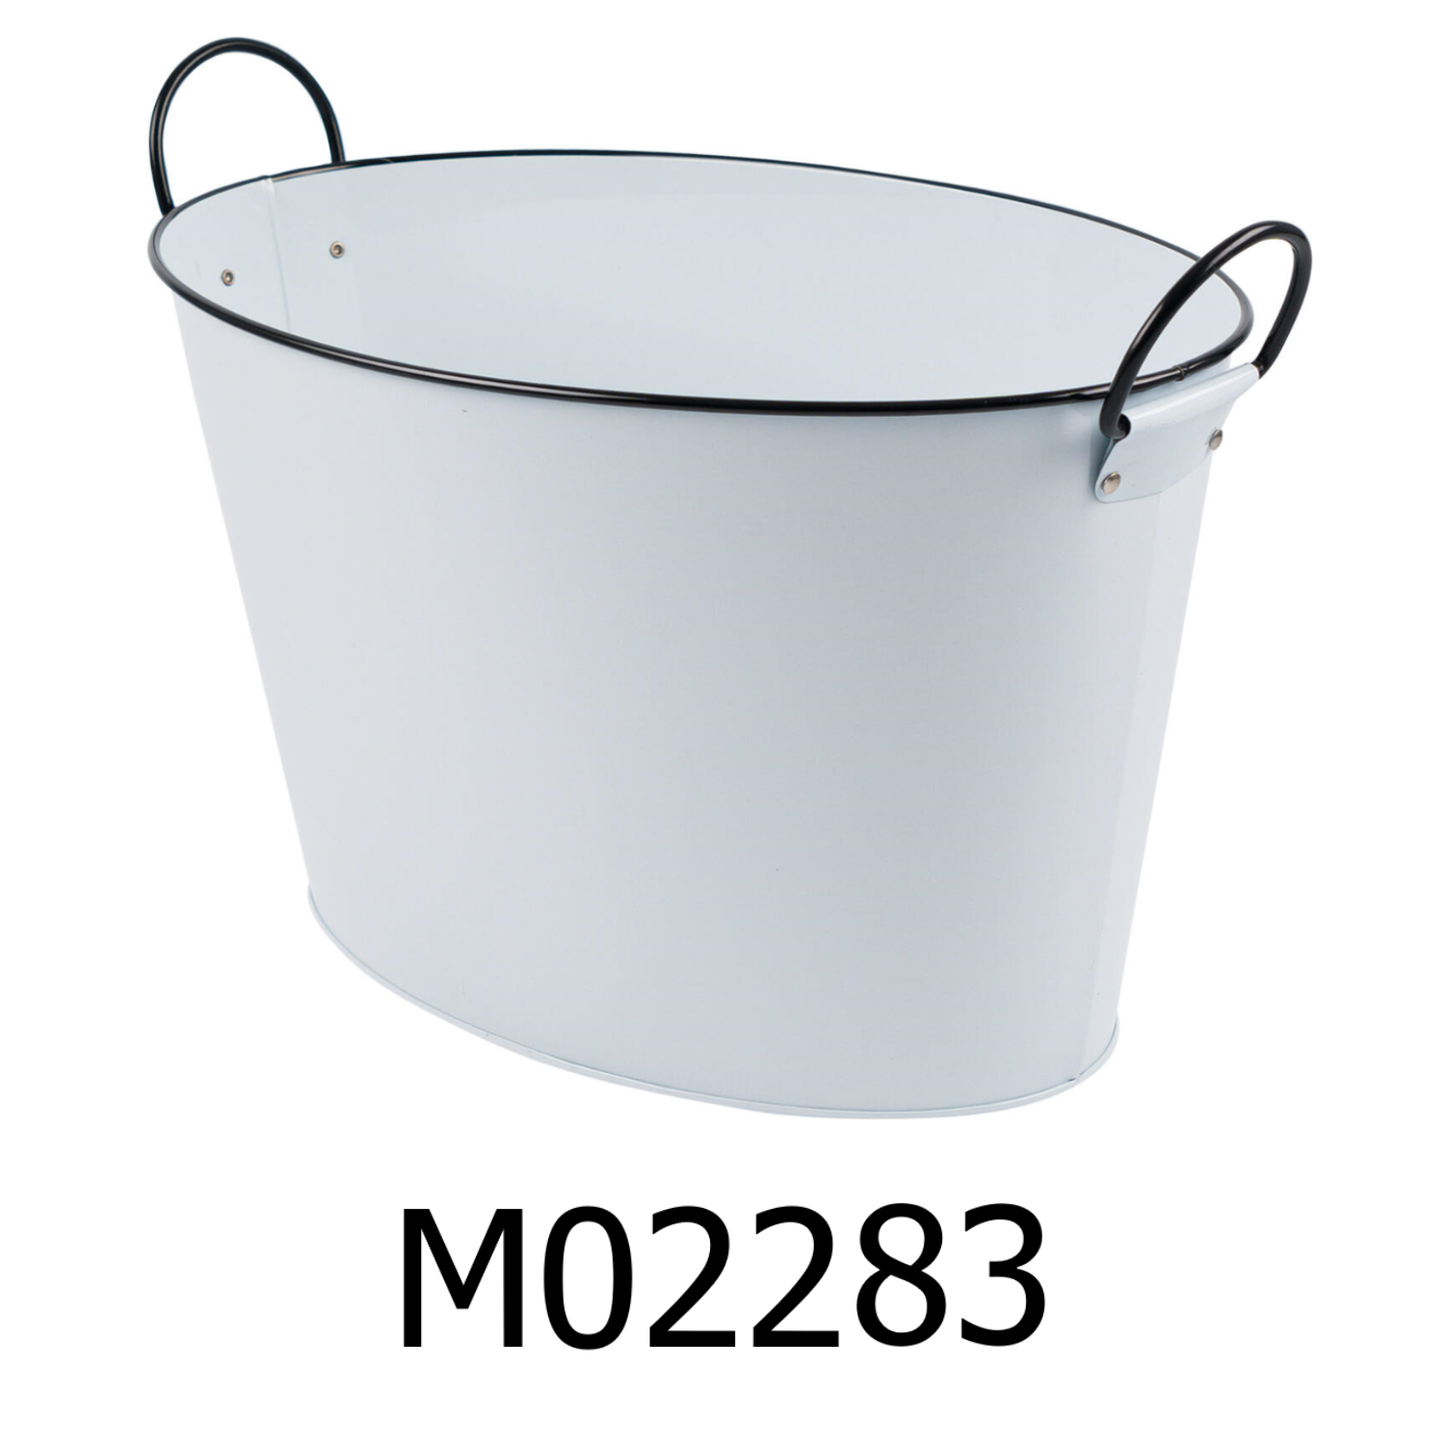 14.5” Oval White Bucket with Black Rim & Handle